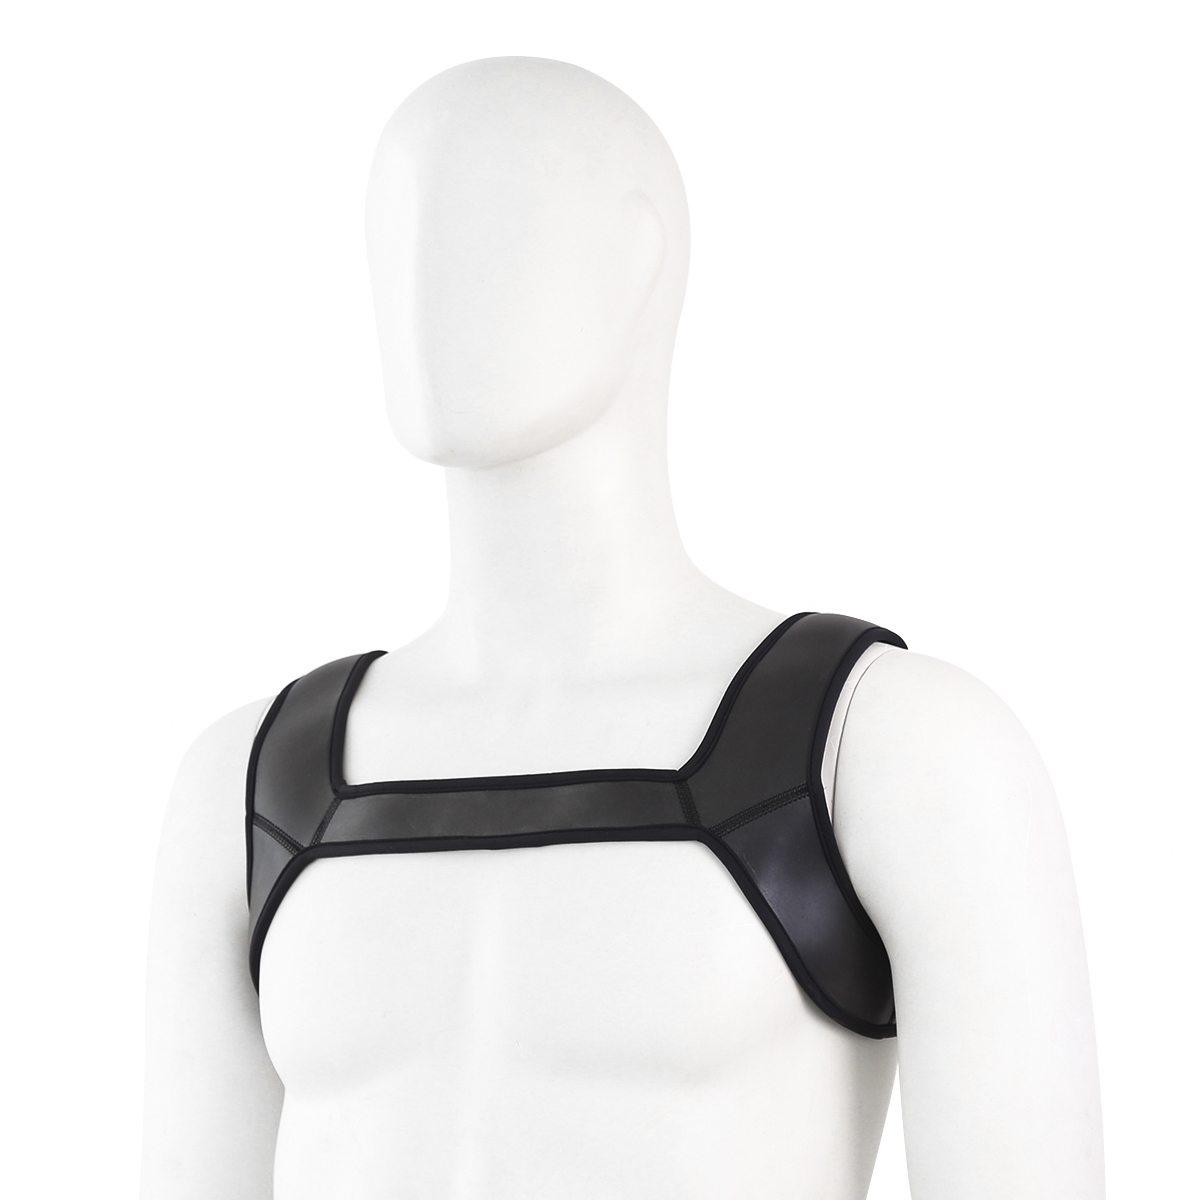 Harness-Sport-Muscle-Protector-L-OPR-321005-1